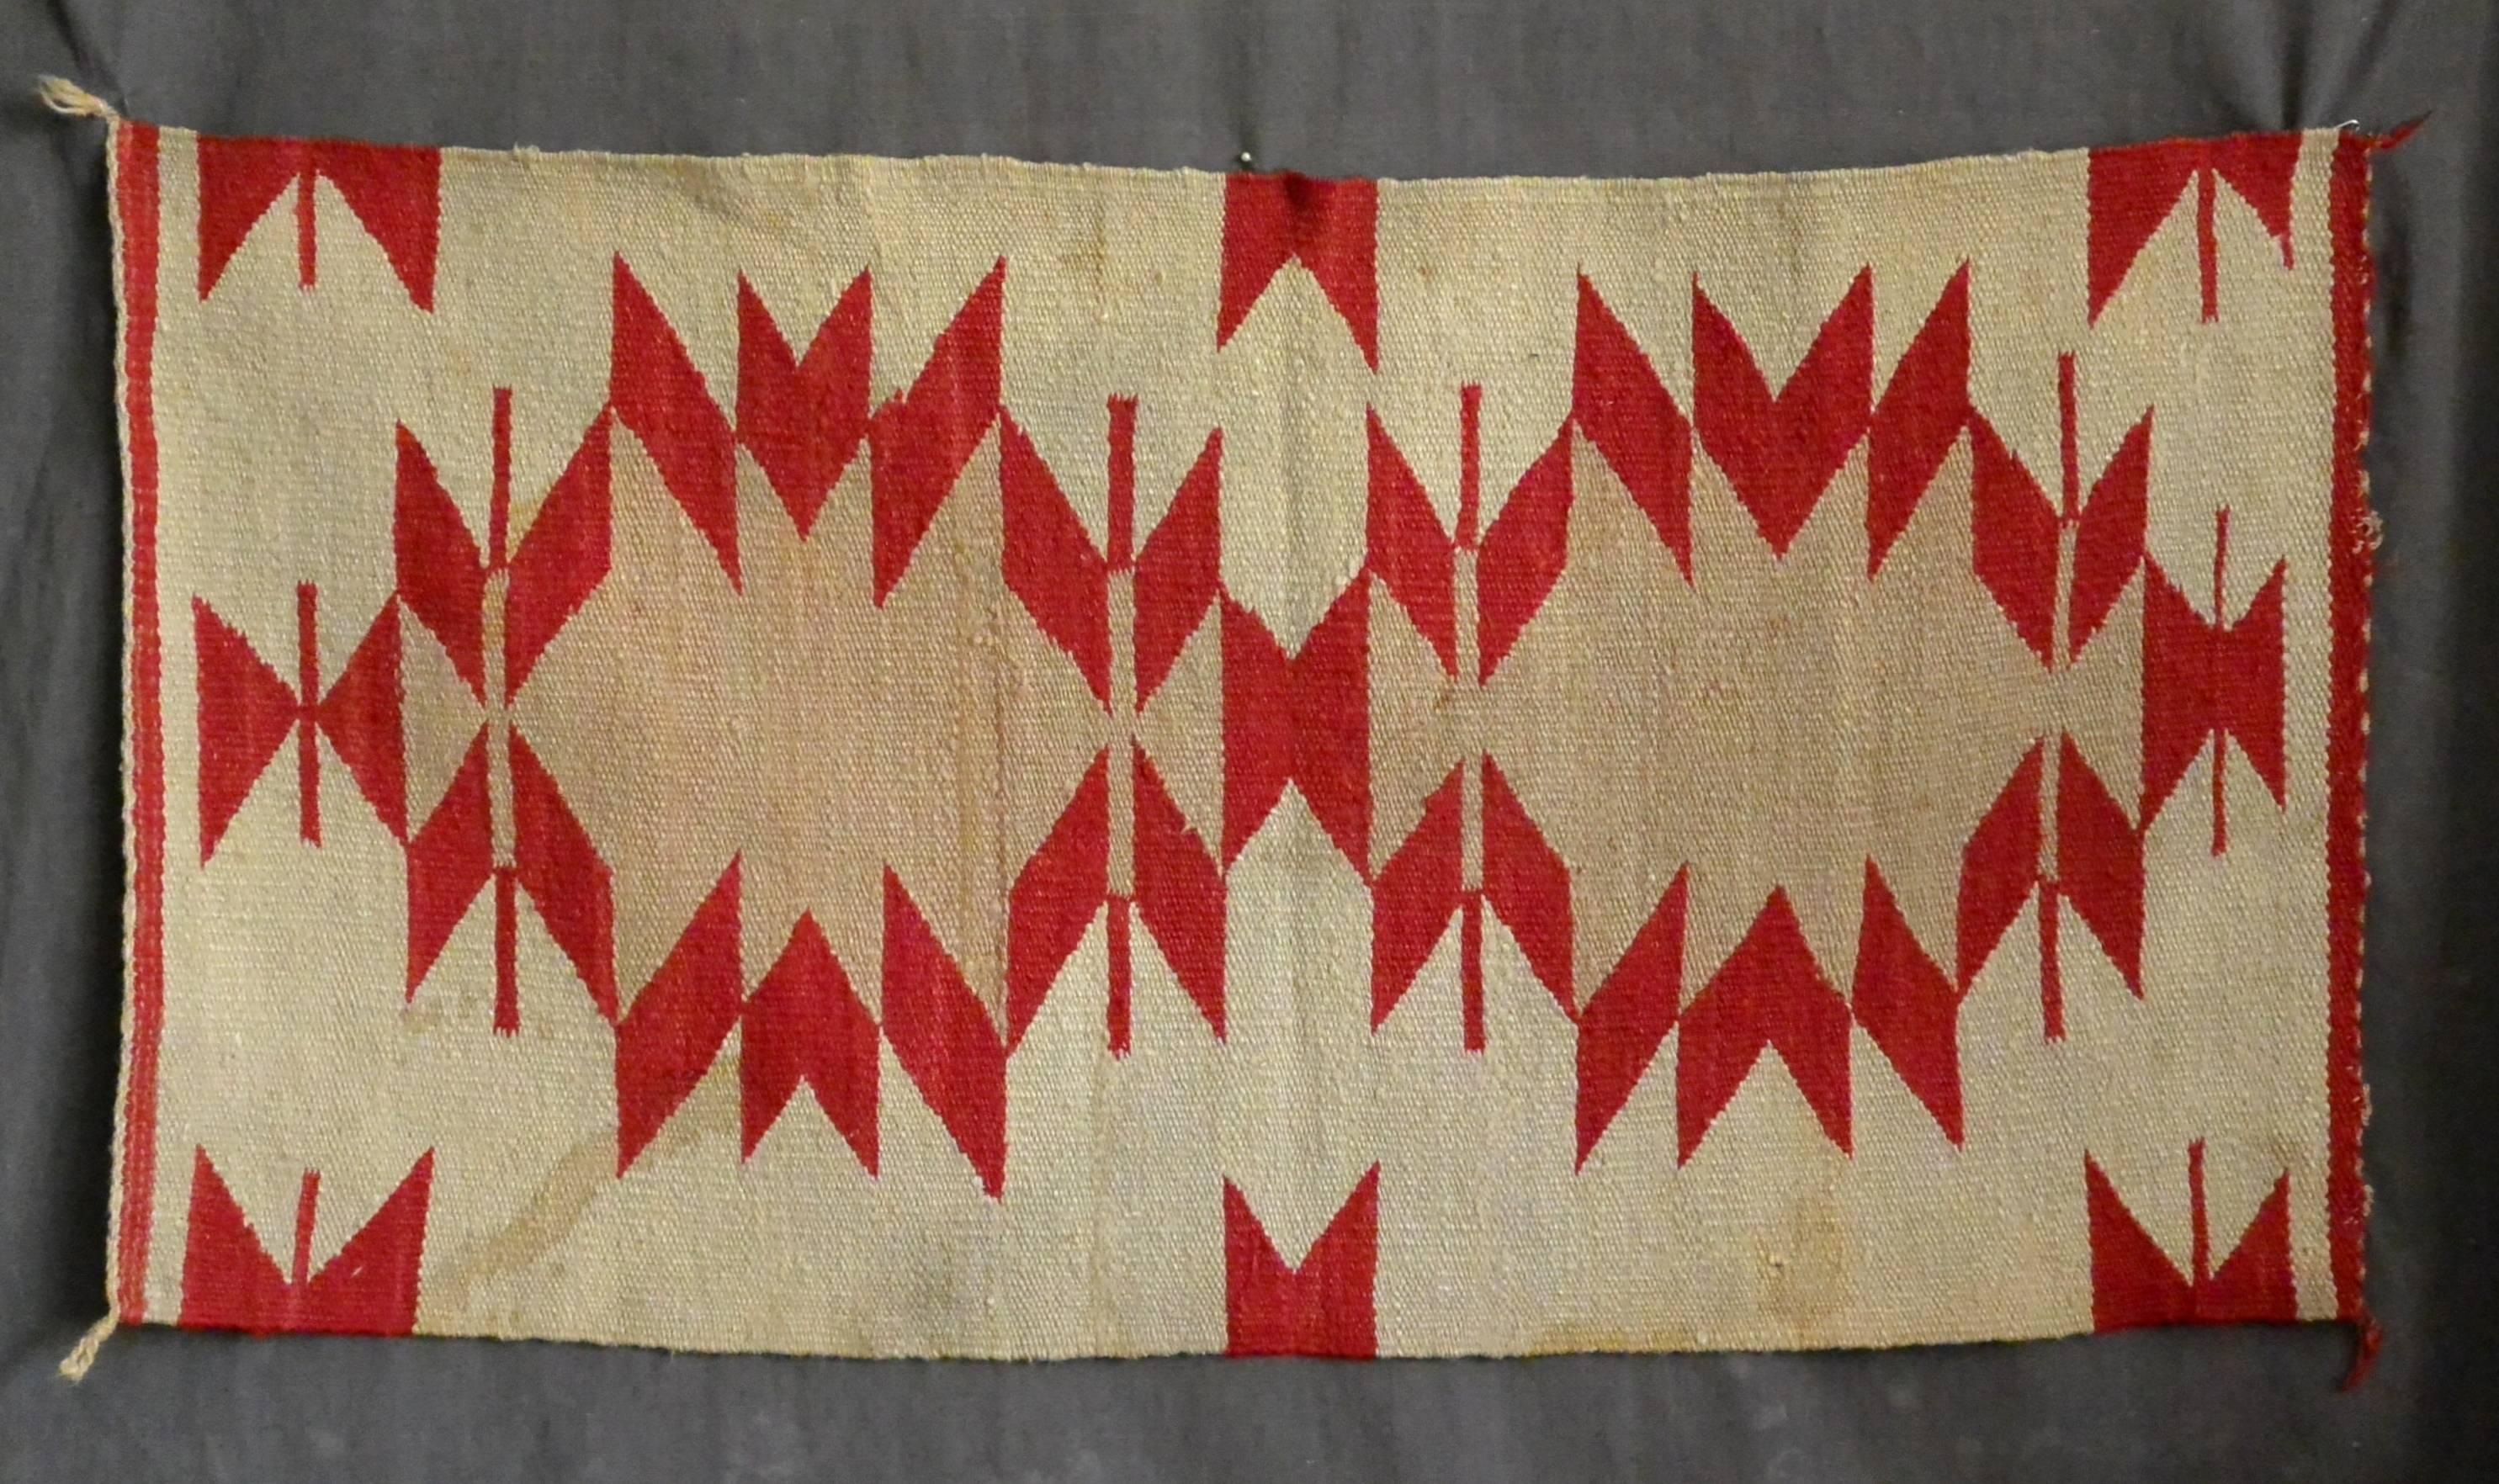 Native American Blanket.  Antique flat-woven cream, camel and red wool American Indian saddle blanket of geometric design.  Handsome modern design wall hanging.   North America, late 19th century. 
Dimension: 20